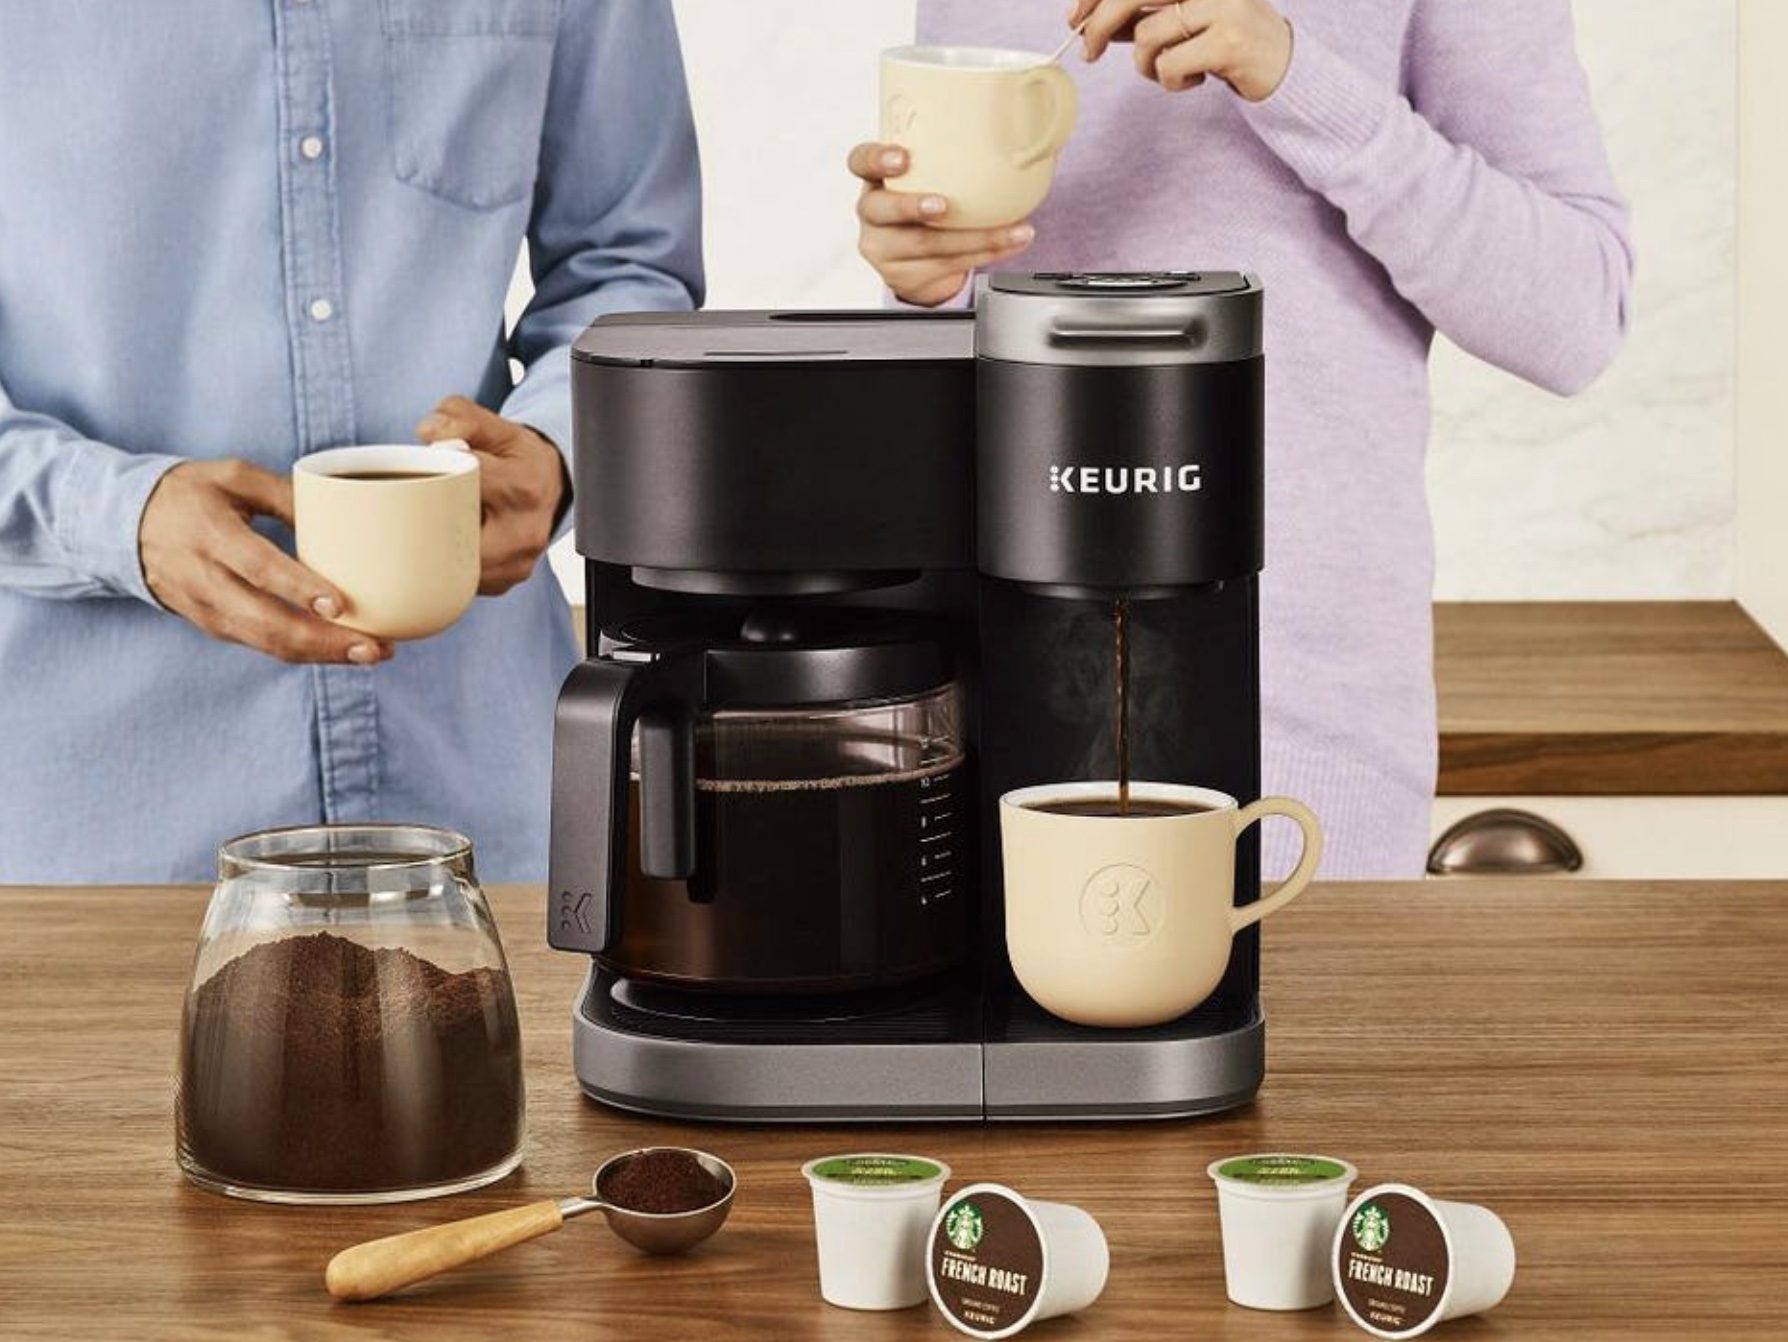 Best coffee maker deals: Get a coffee maker up to 50% off on